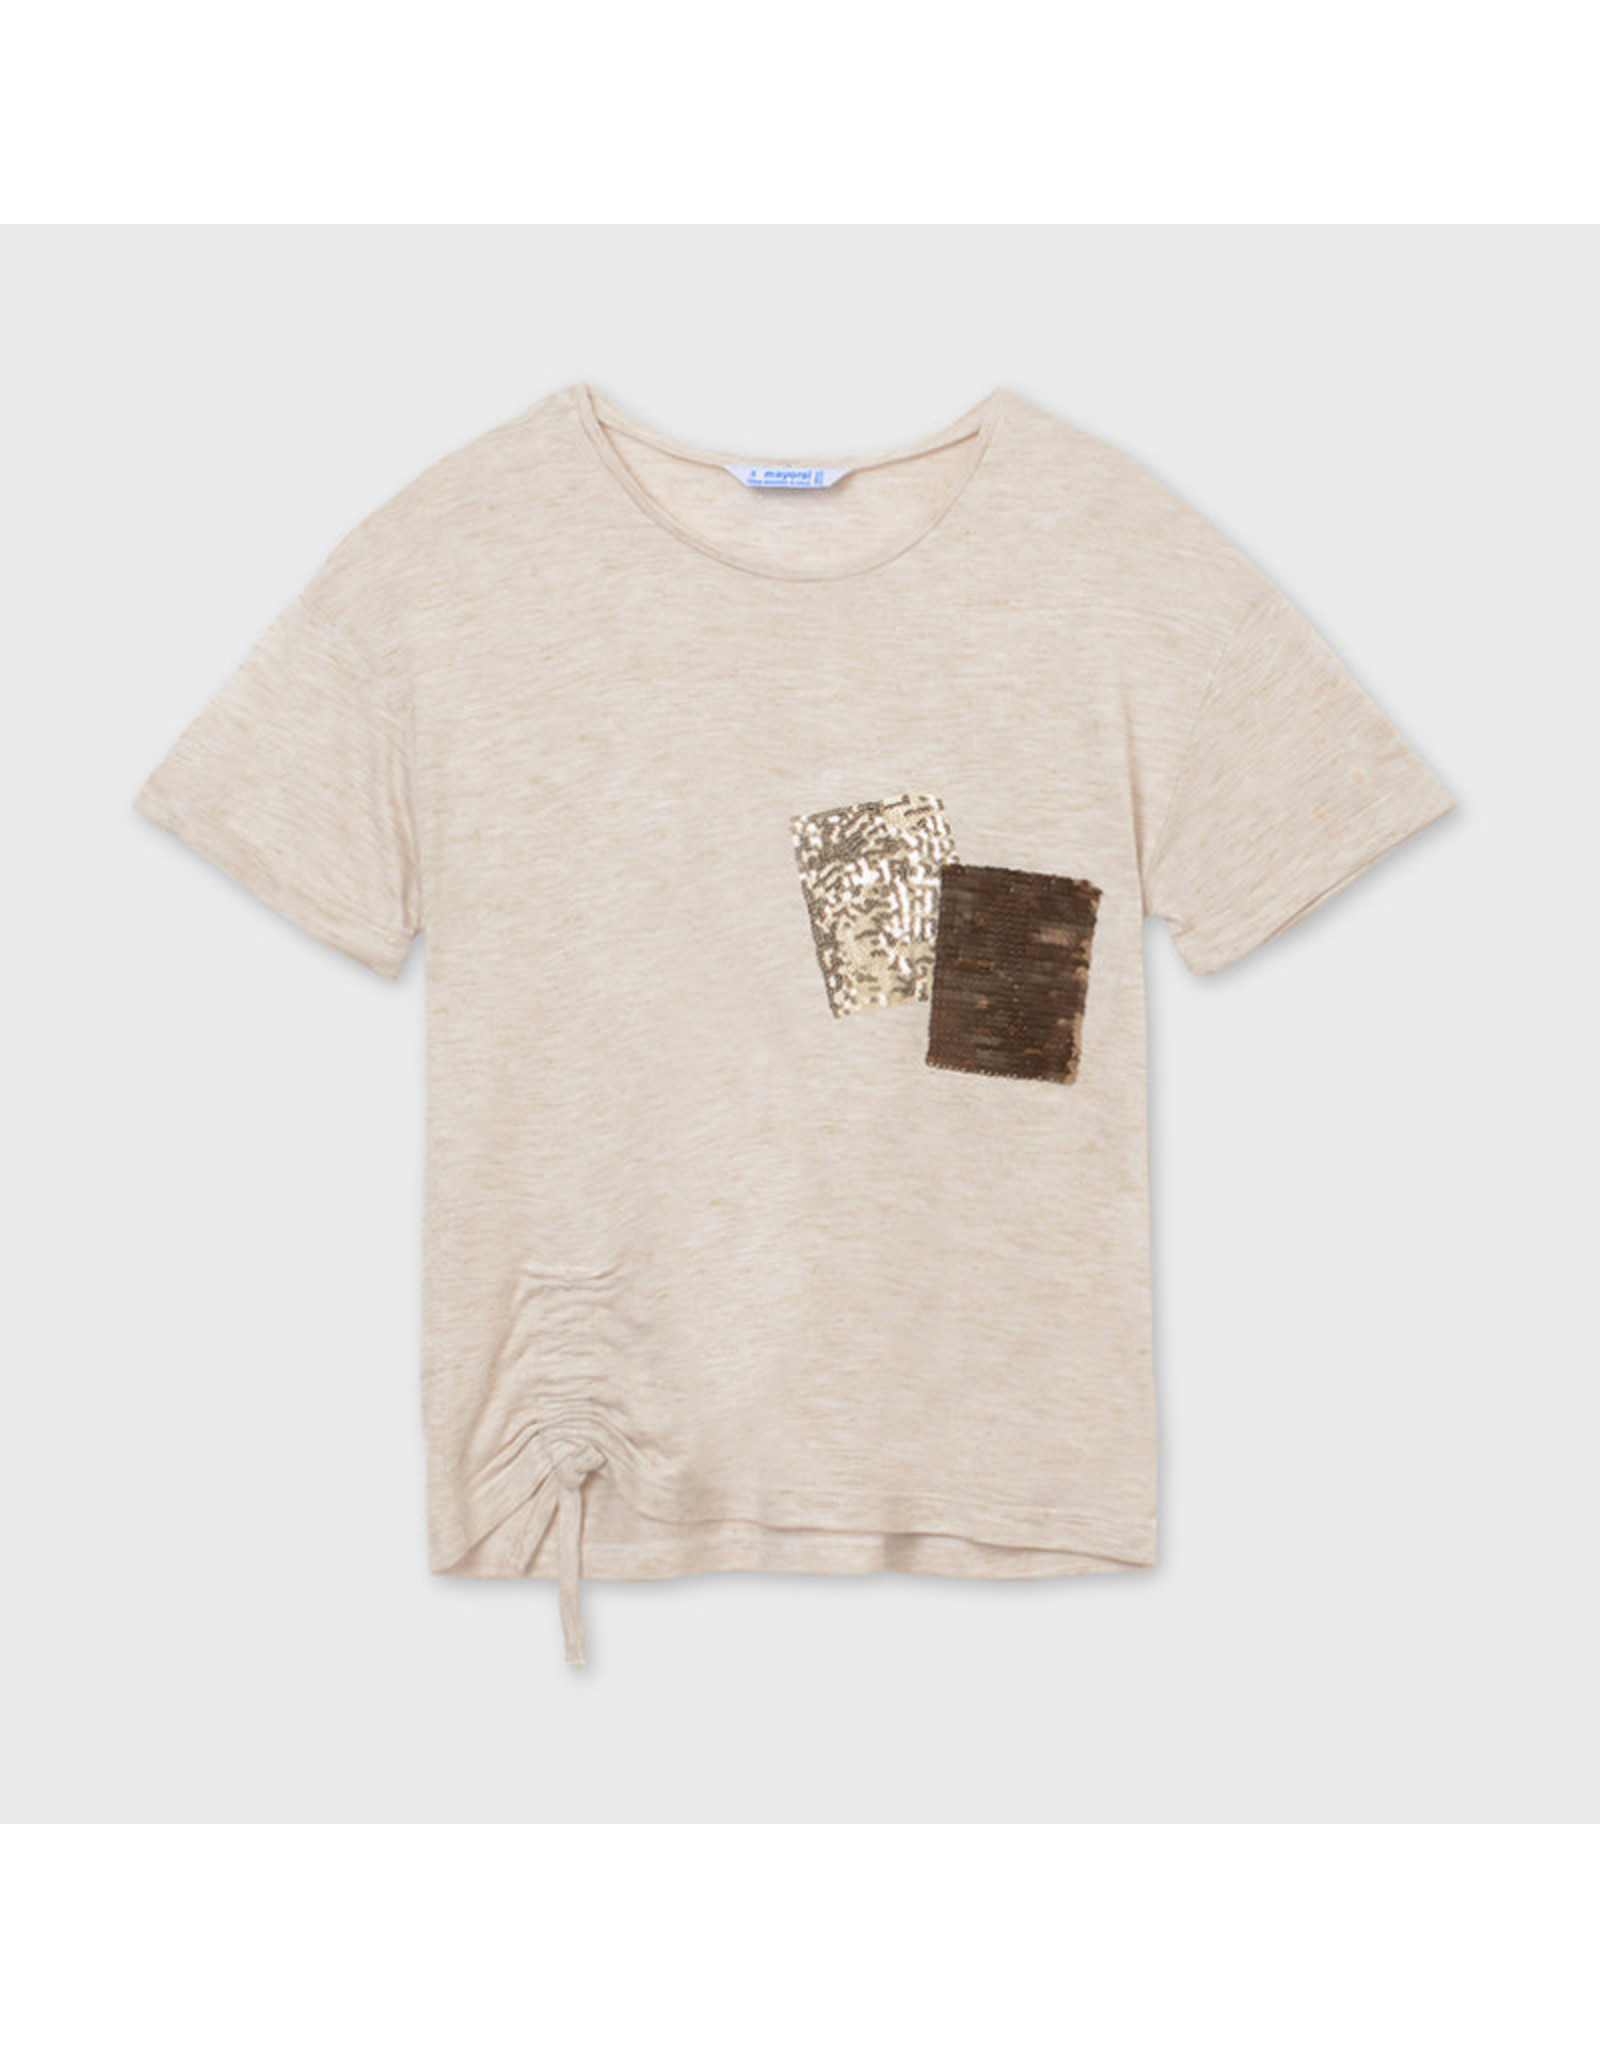 Mayoral T-Shirt with Sequin Pocket